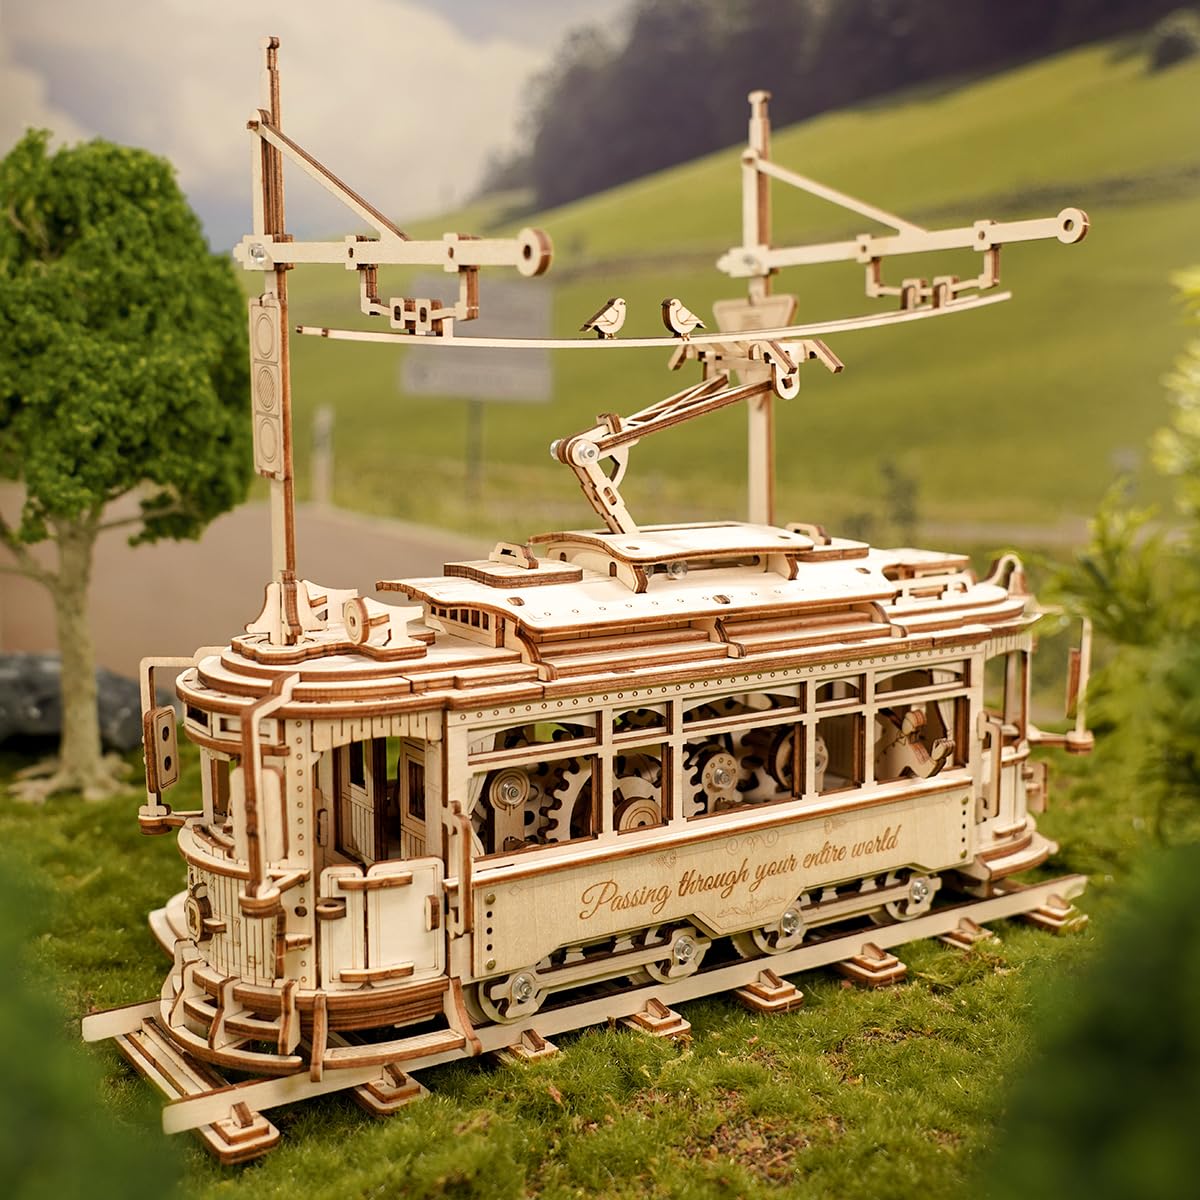 RoWood 3D Wooden Mechanical Tram Model Puzzle $22.50 + Free Shipping